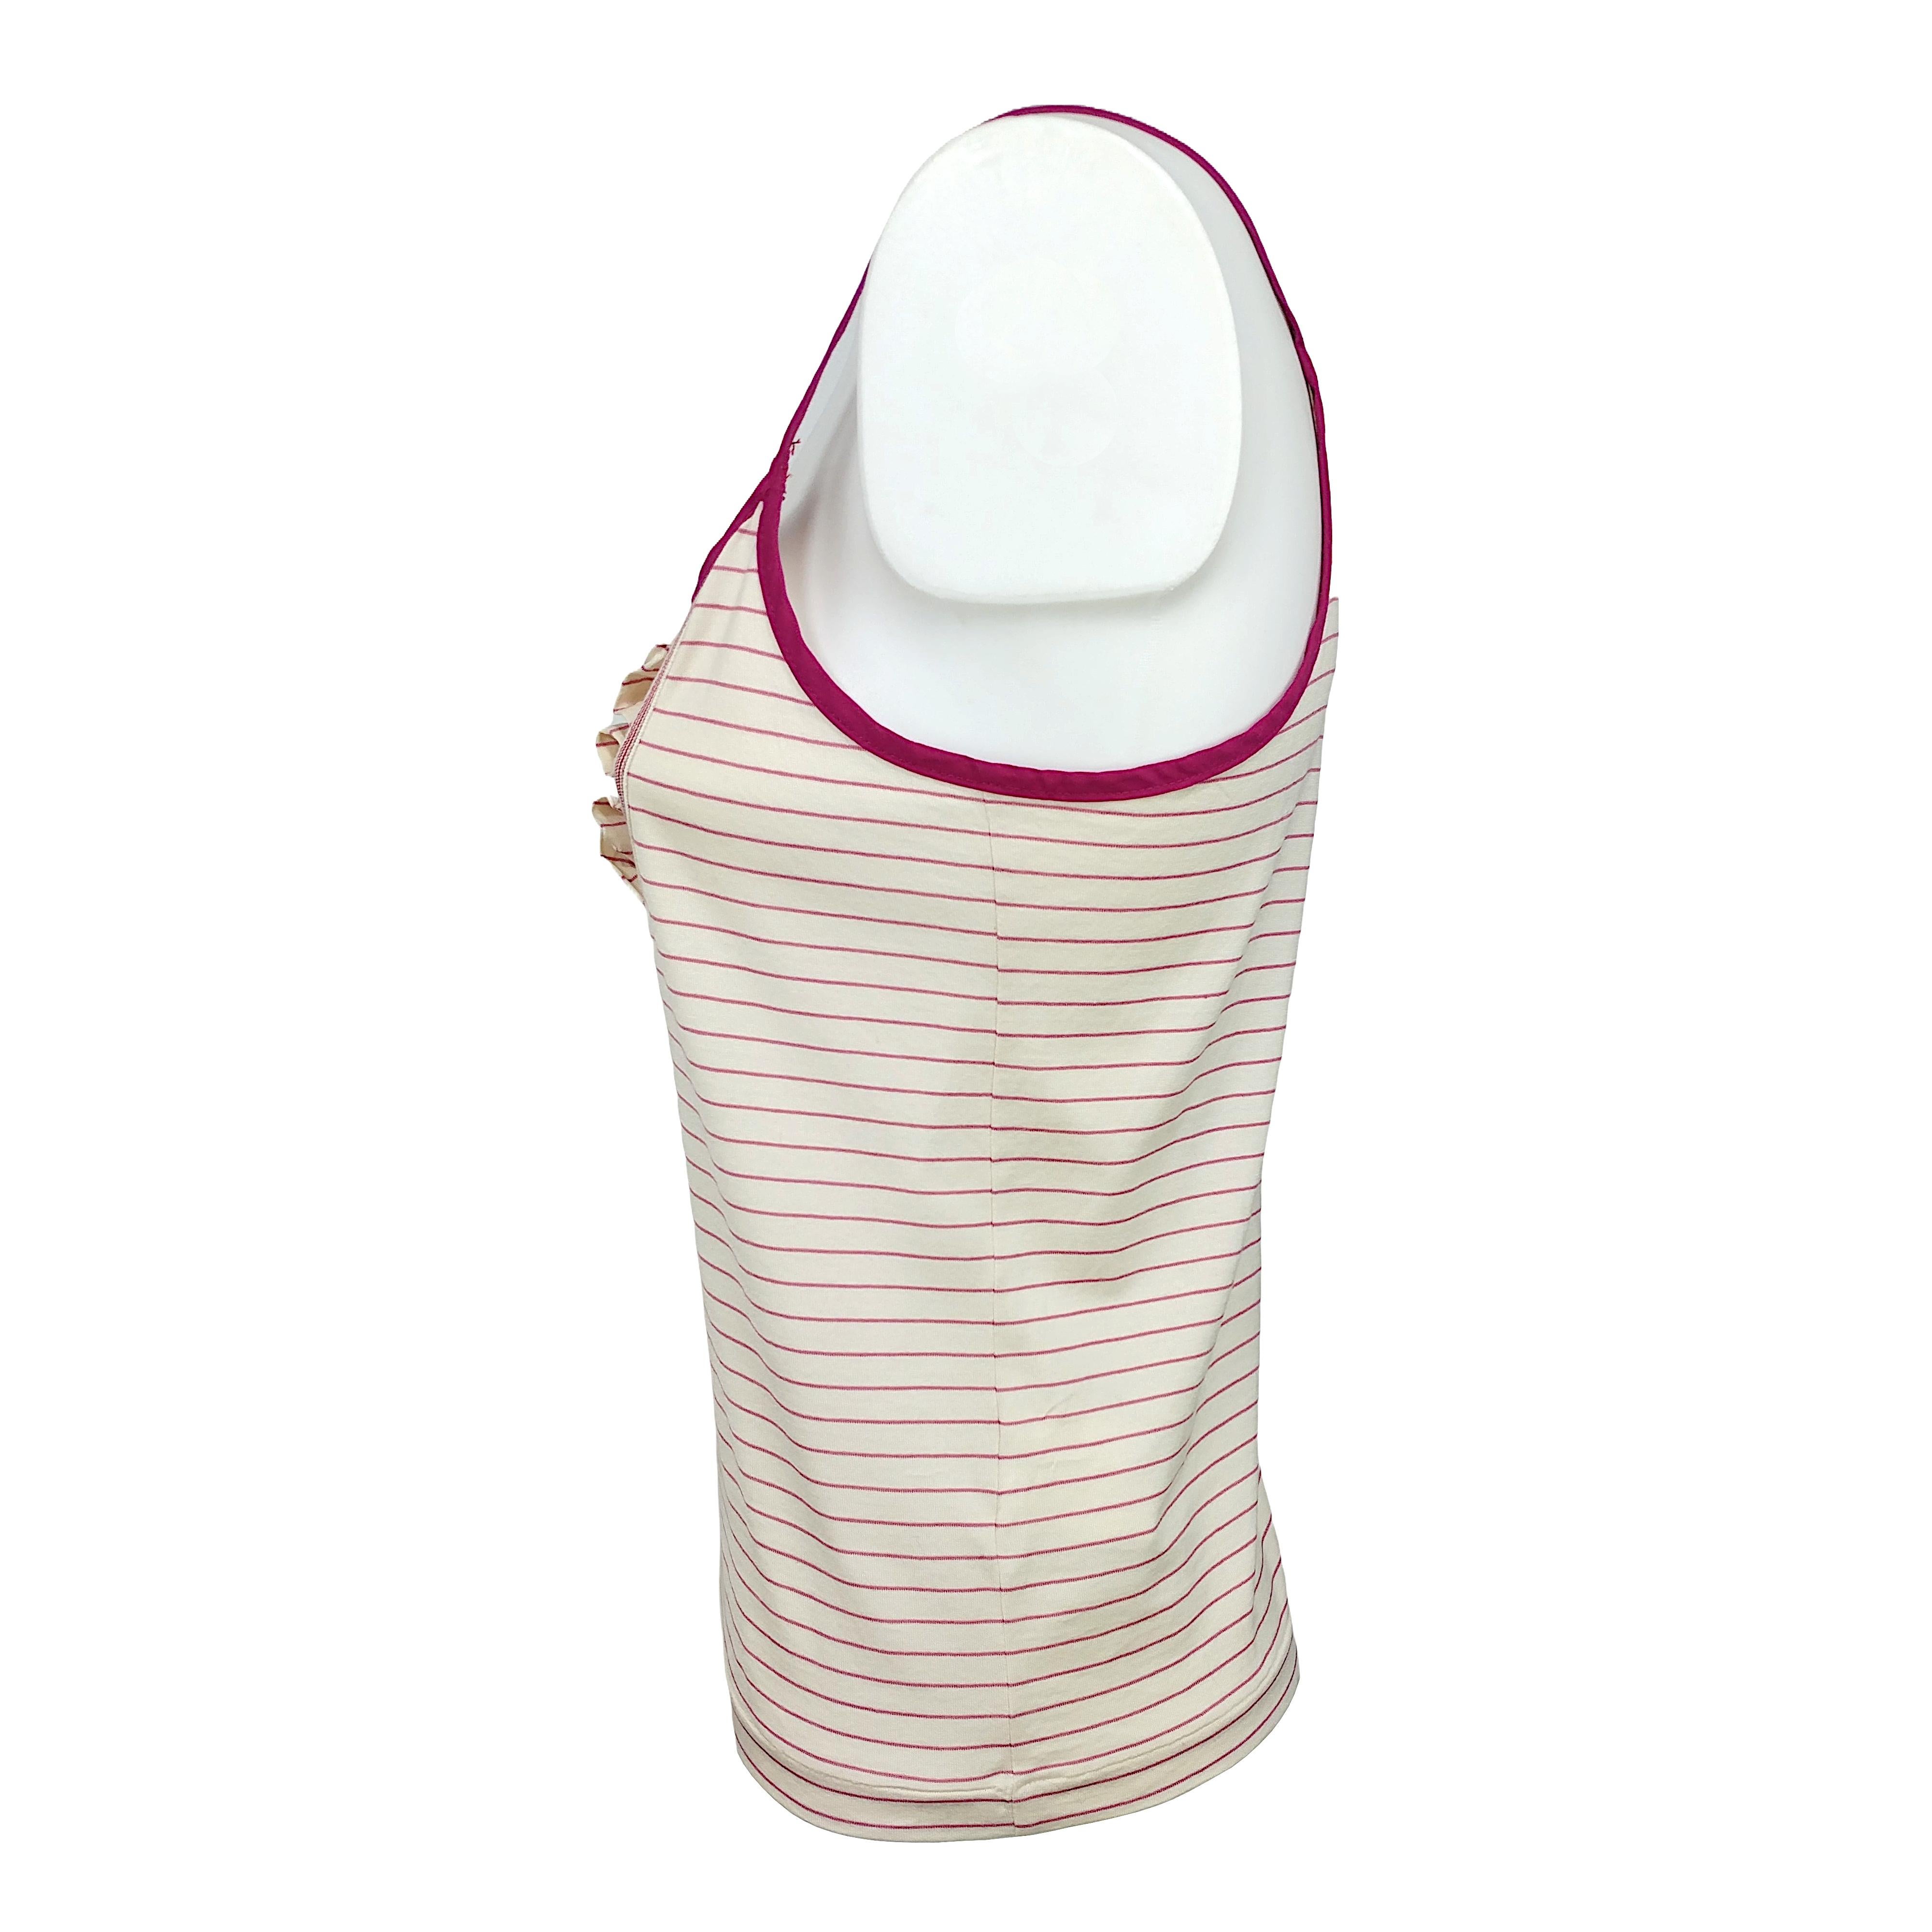 Introducing a refined tank top from D&G, crafted in stretch cotton with purple stripes on an ecru white background. This summer essential combines style and comfort effortlessly. The round neckline adds a classic touch, while the subtle ruffles on